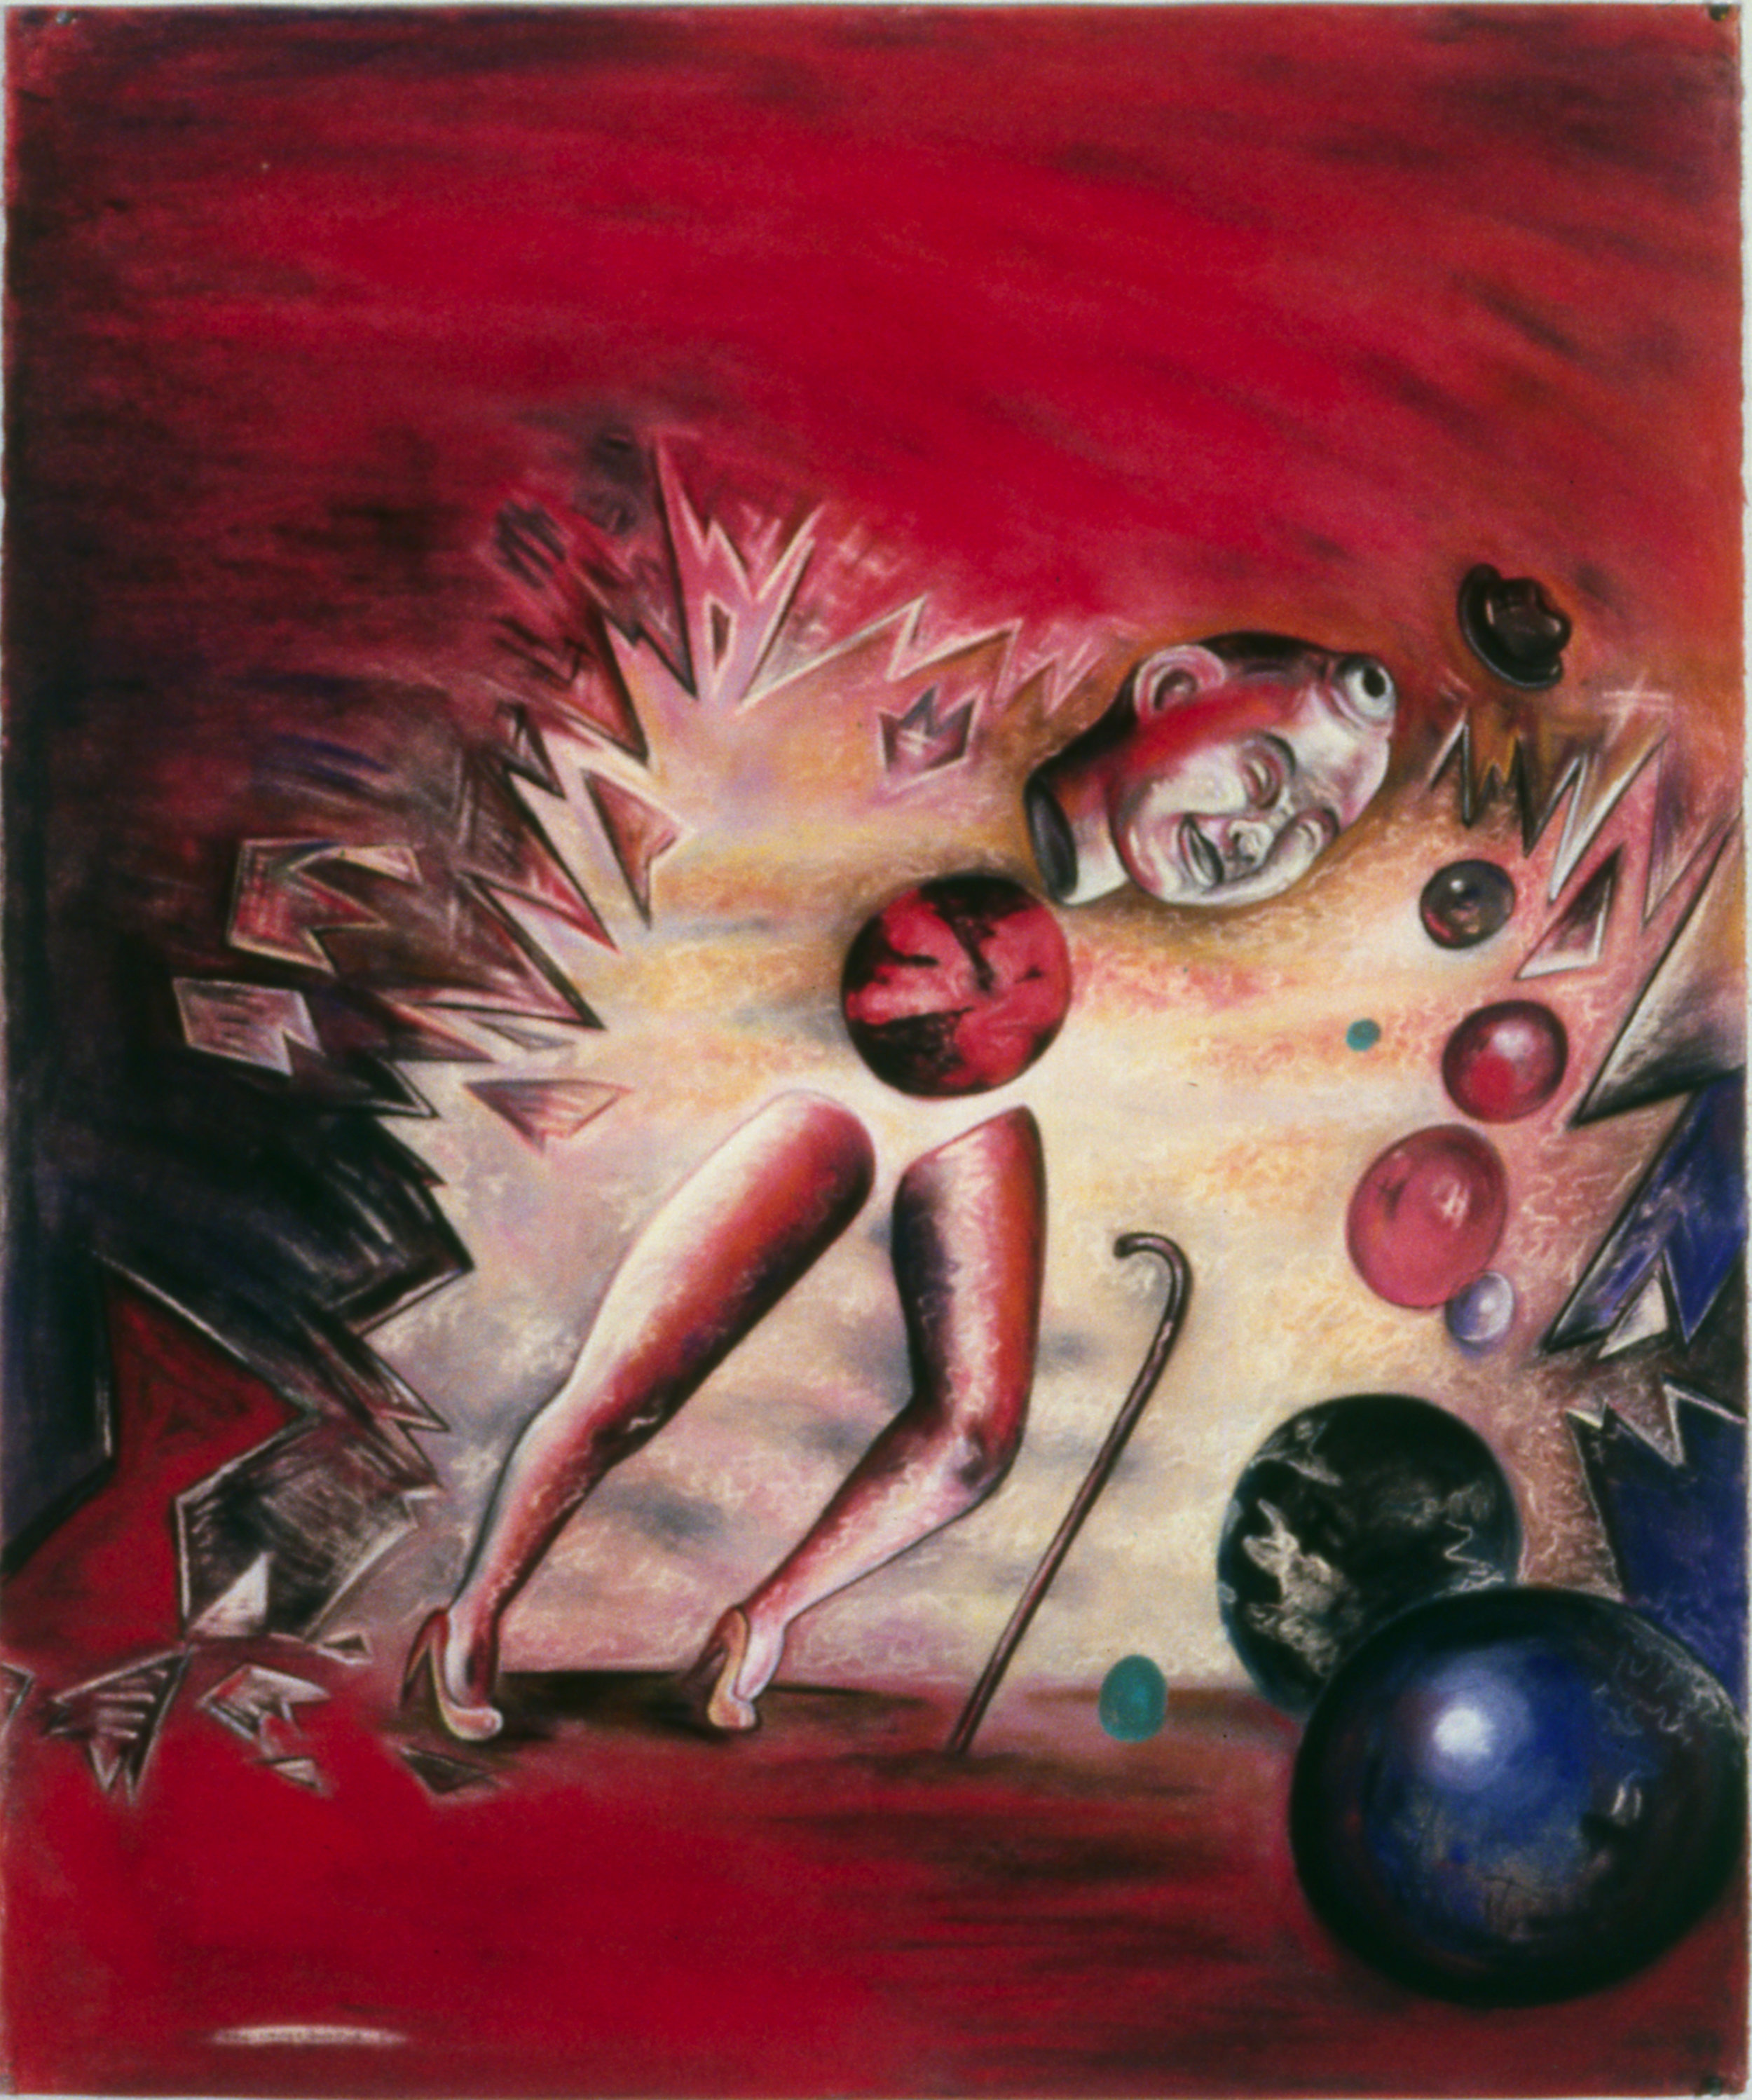 Impersonator I, 50" x 42", pastel on paper, 1988